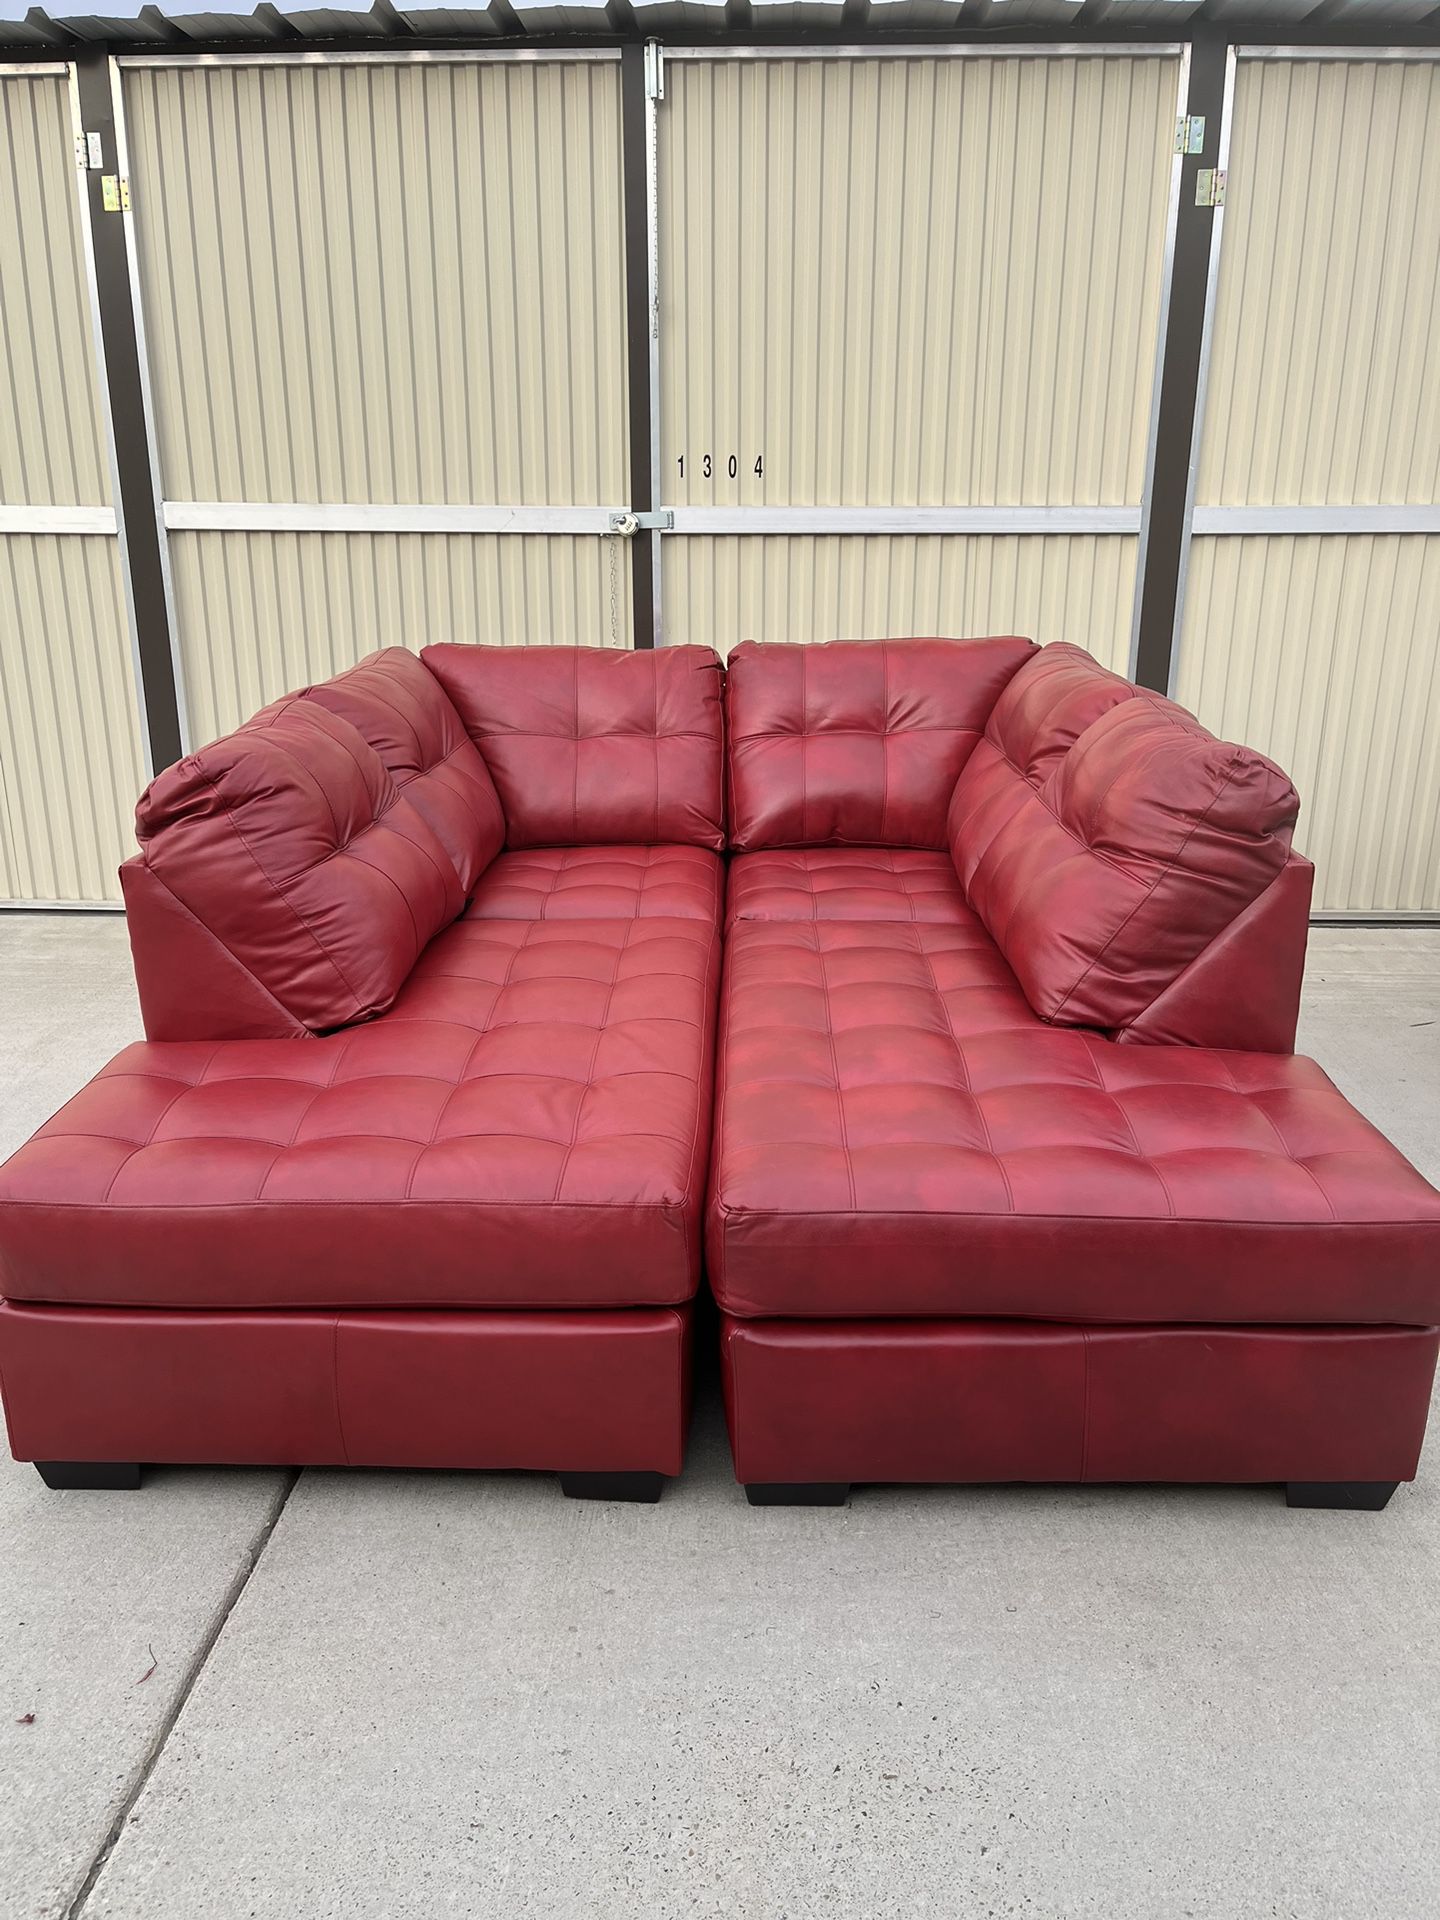 Brand New Crimson Red Double Chaise Sofa Bed